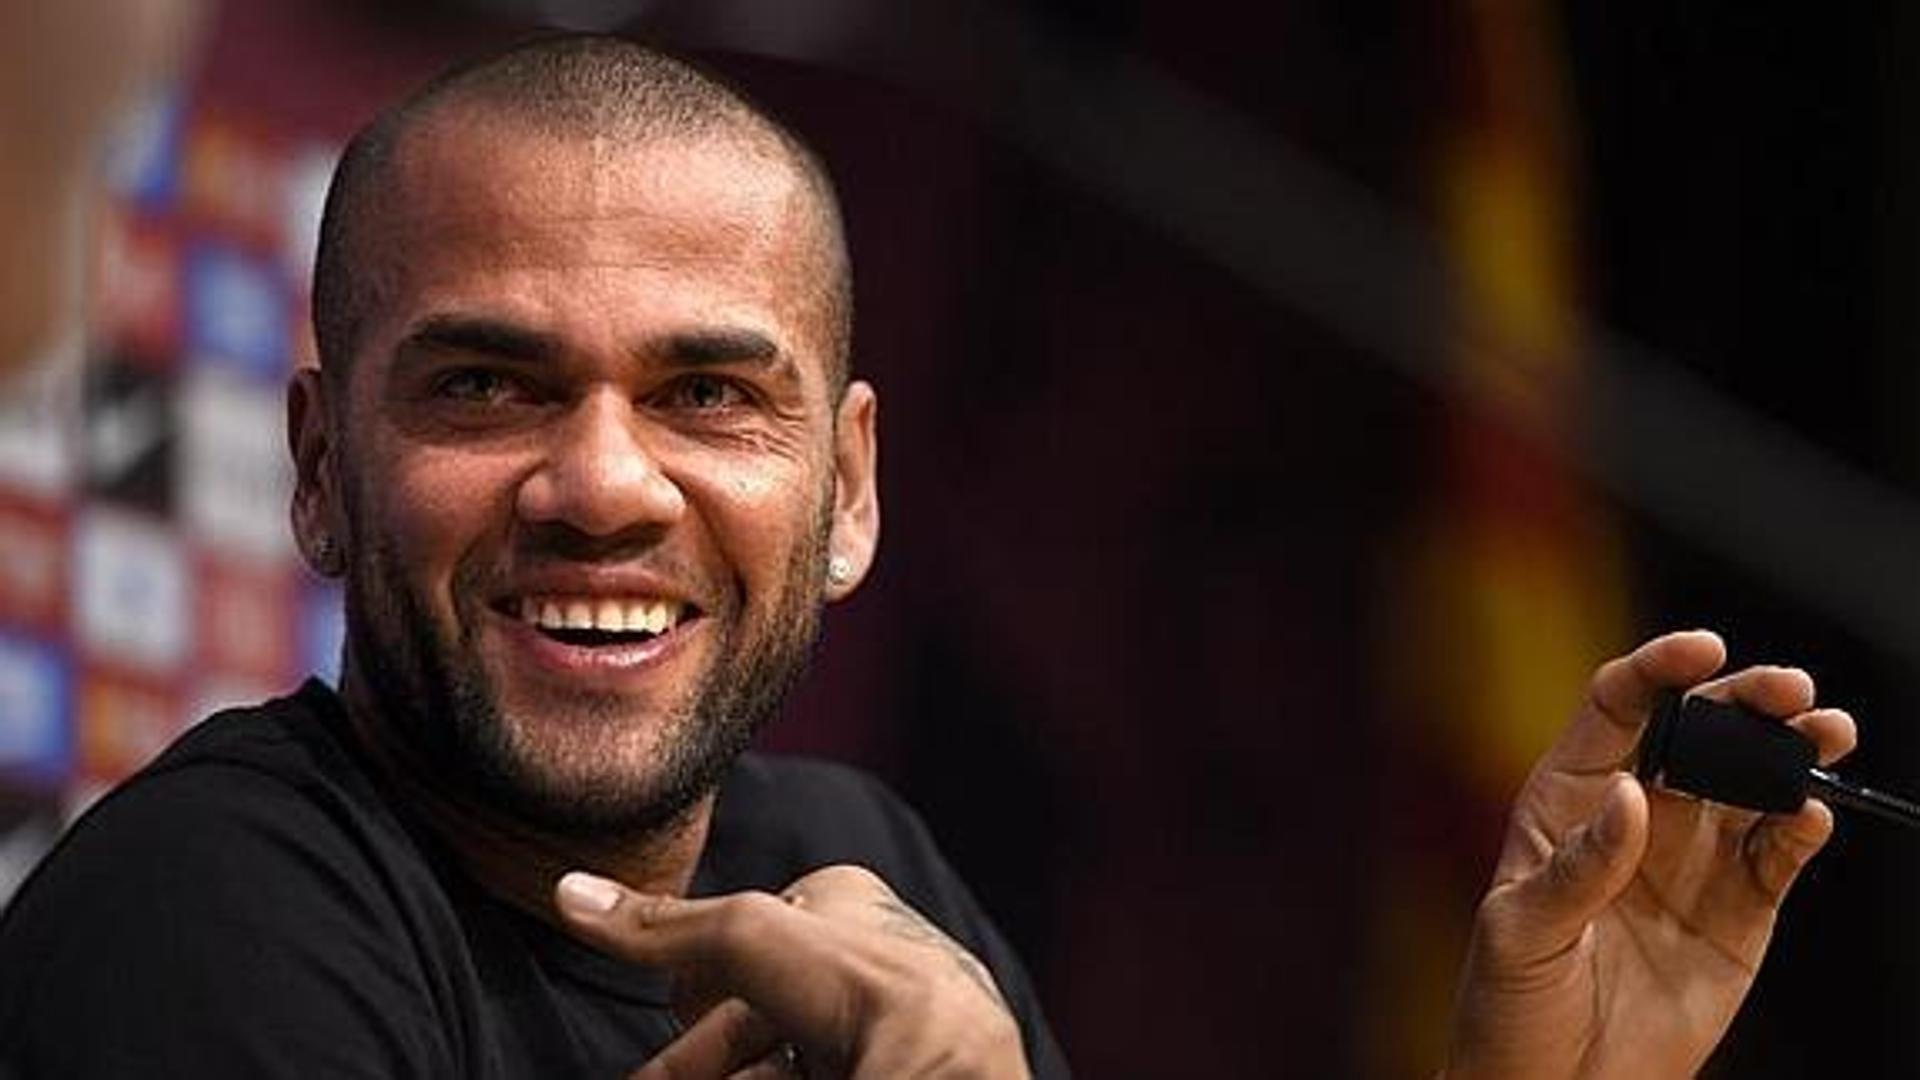 Alves declares before the judge at his own request